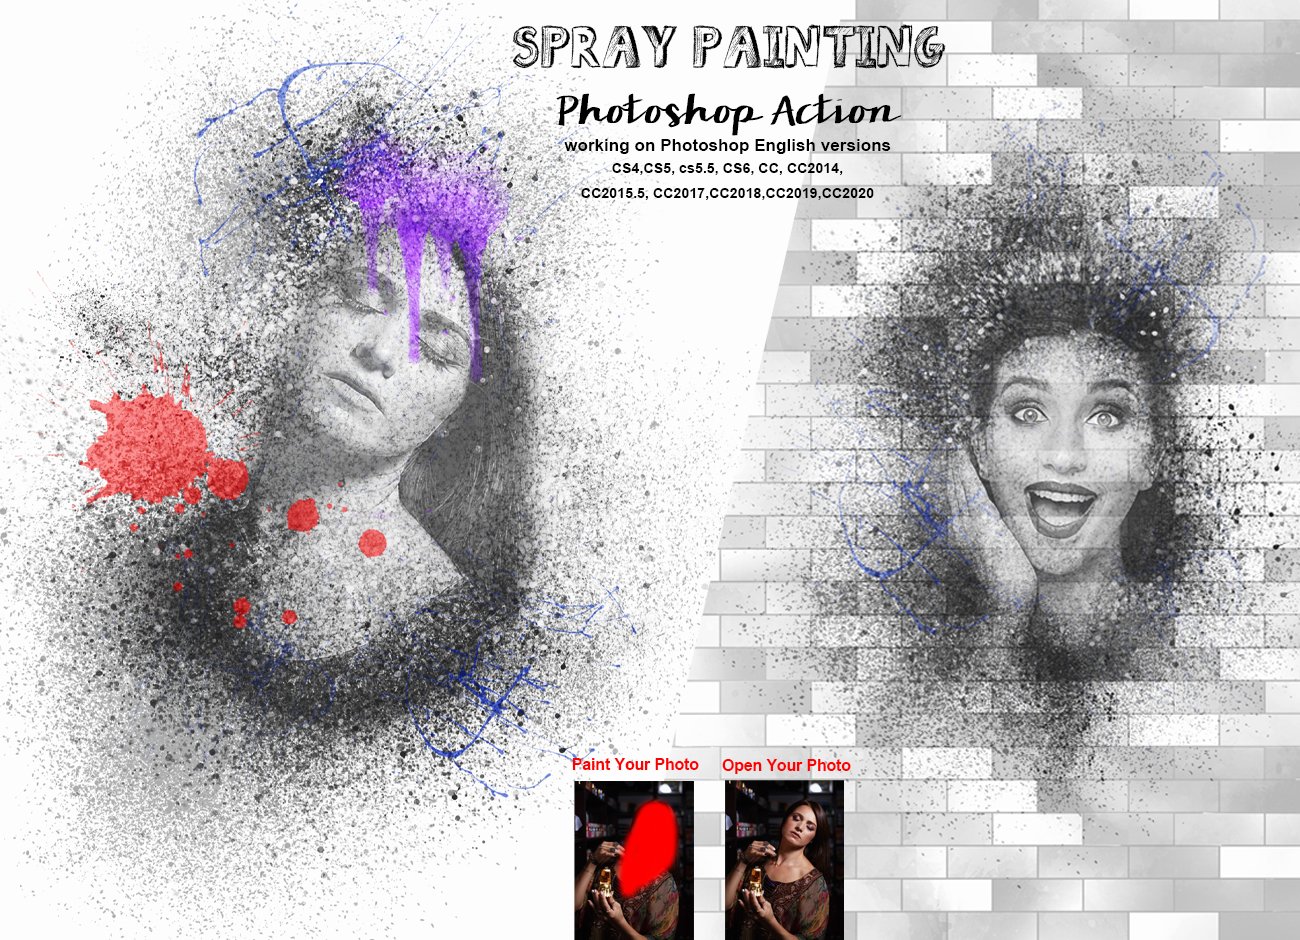 Spray Painting Photoshop Actioncover image.